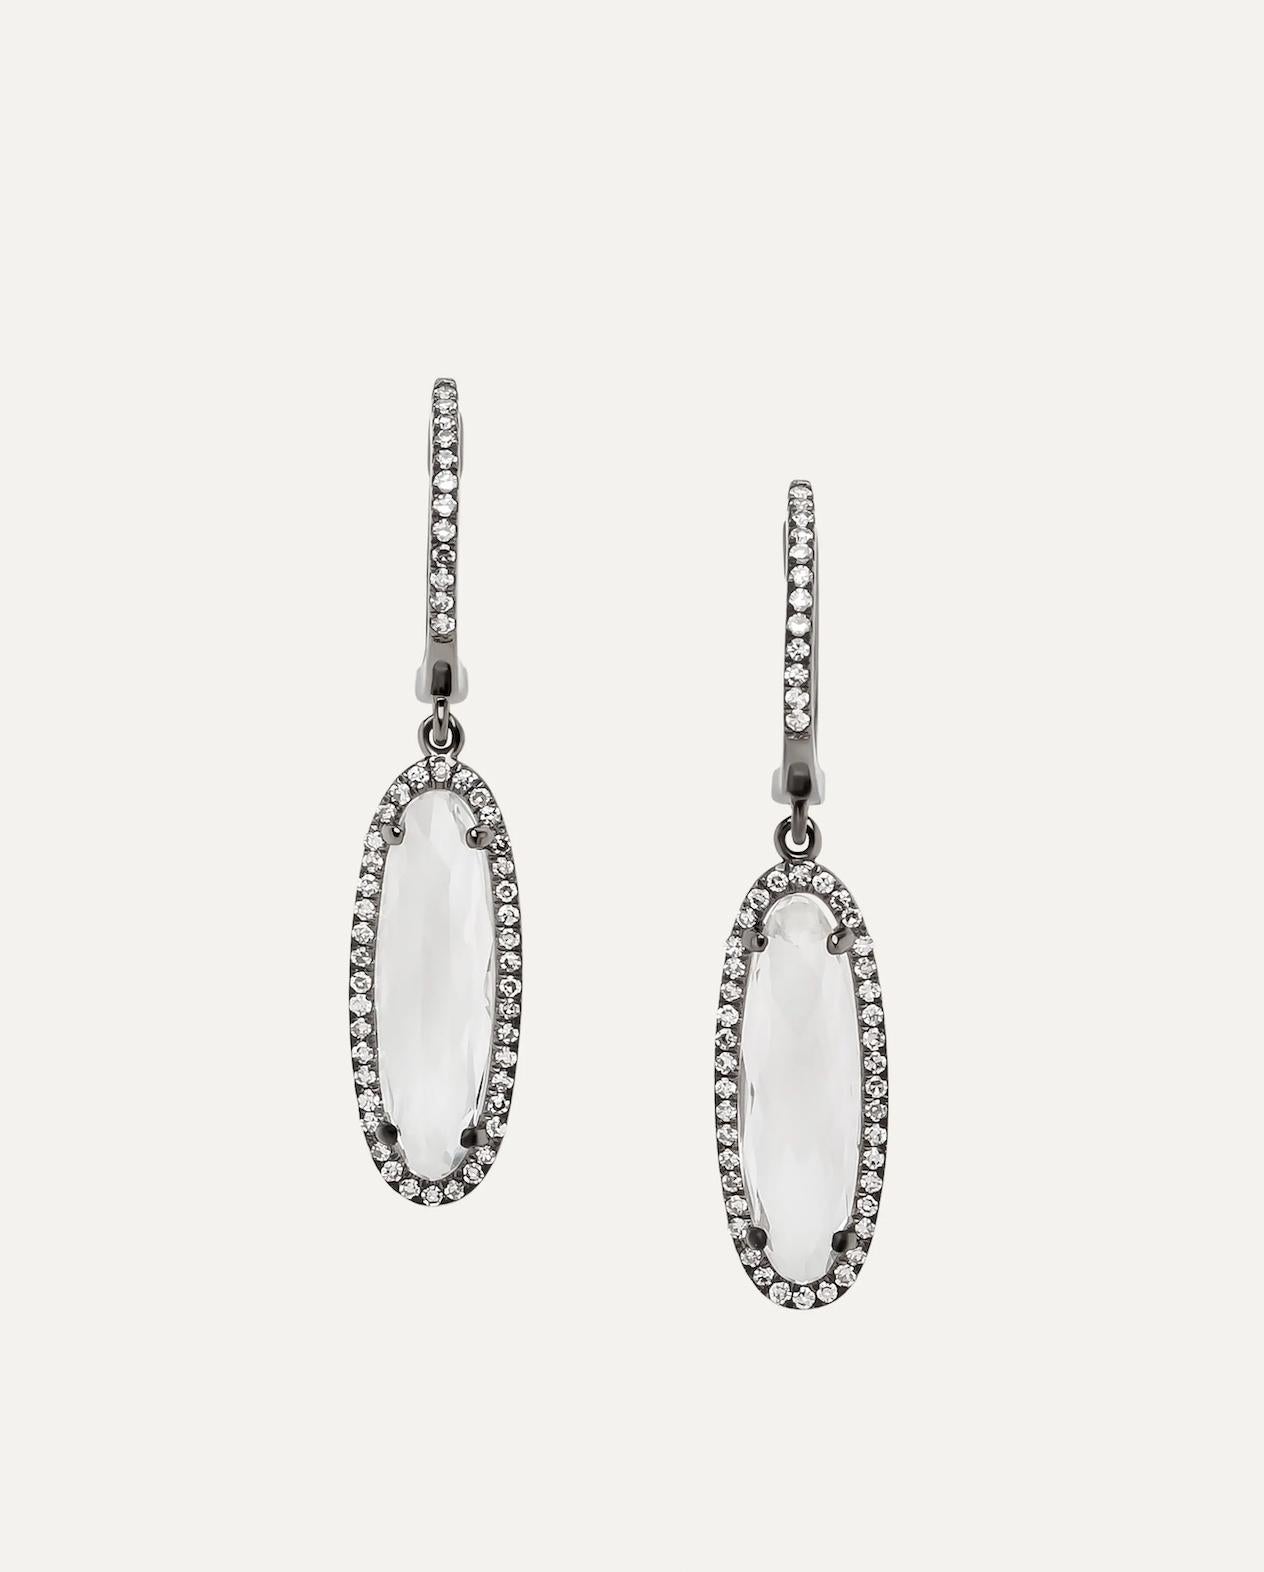 White Topaz Diamond Earrings are a dazzling example of classic beauty and understated luxury. These earrings feature white topaz gemstones, renowned for their exceptional clarity and brilliance, delicately framed by sparkling diamonds. The